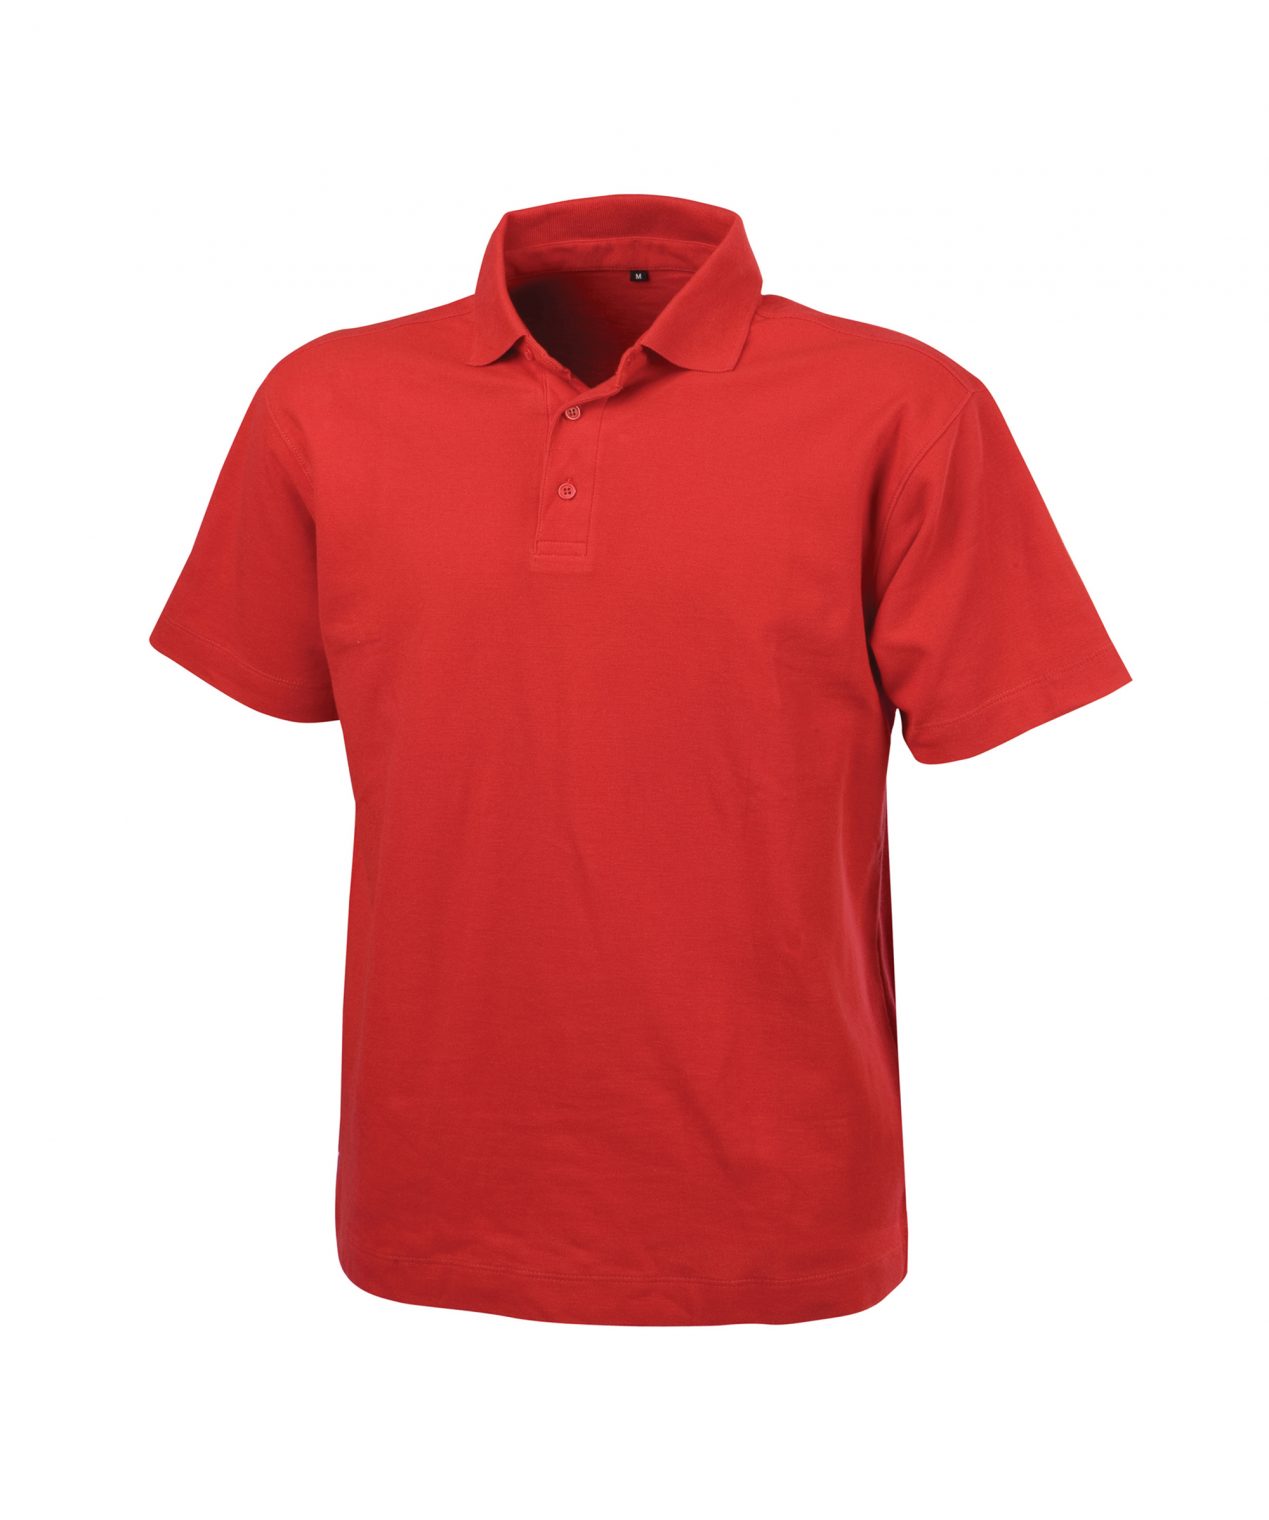 leon polo shirt red front